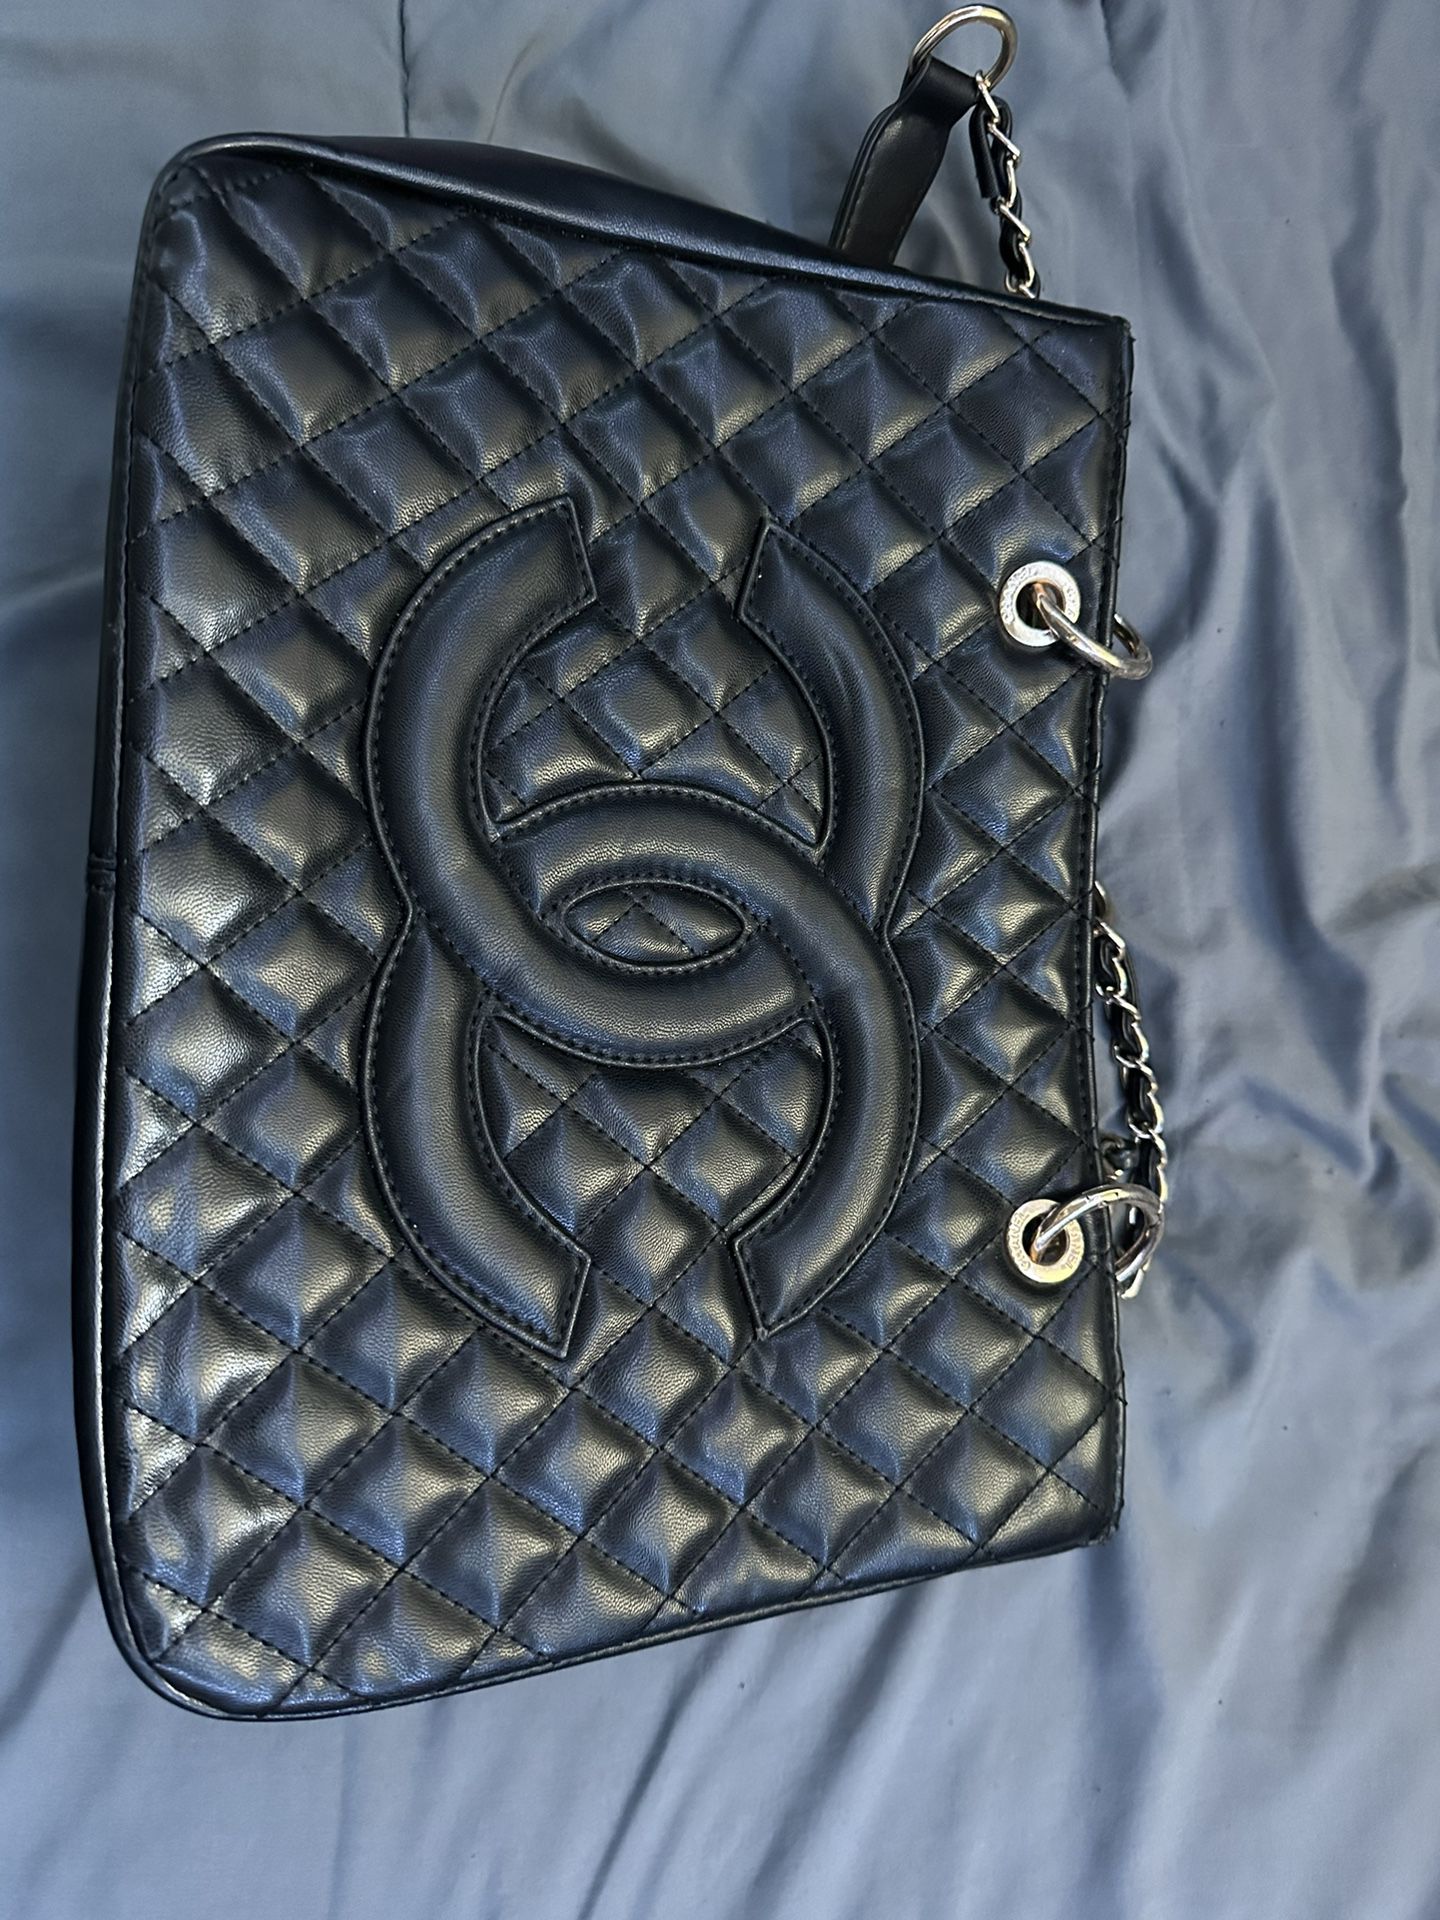 Chanel Tote Bag for Sale in Portland, OR - OfferUp